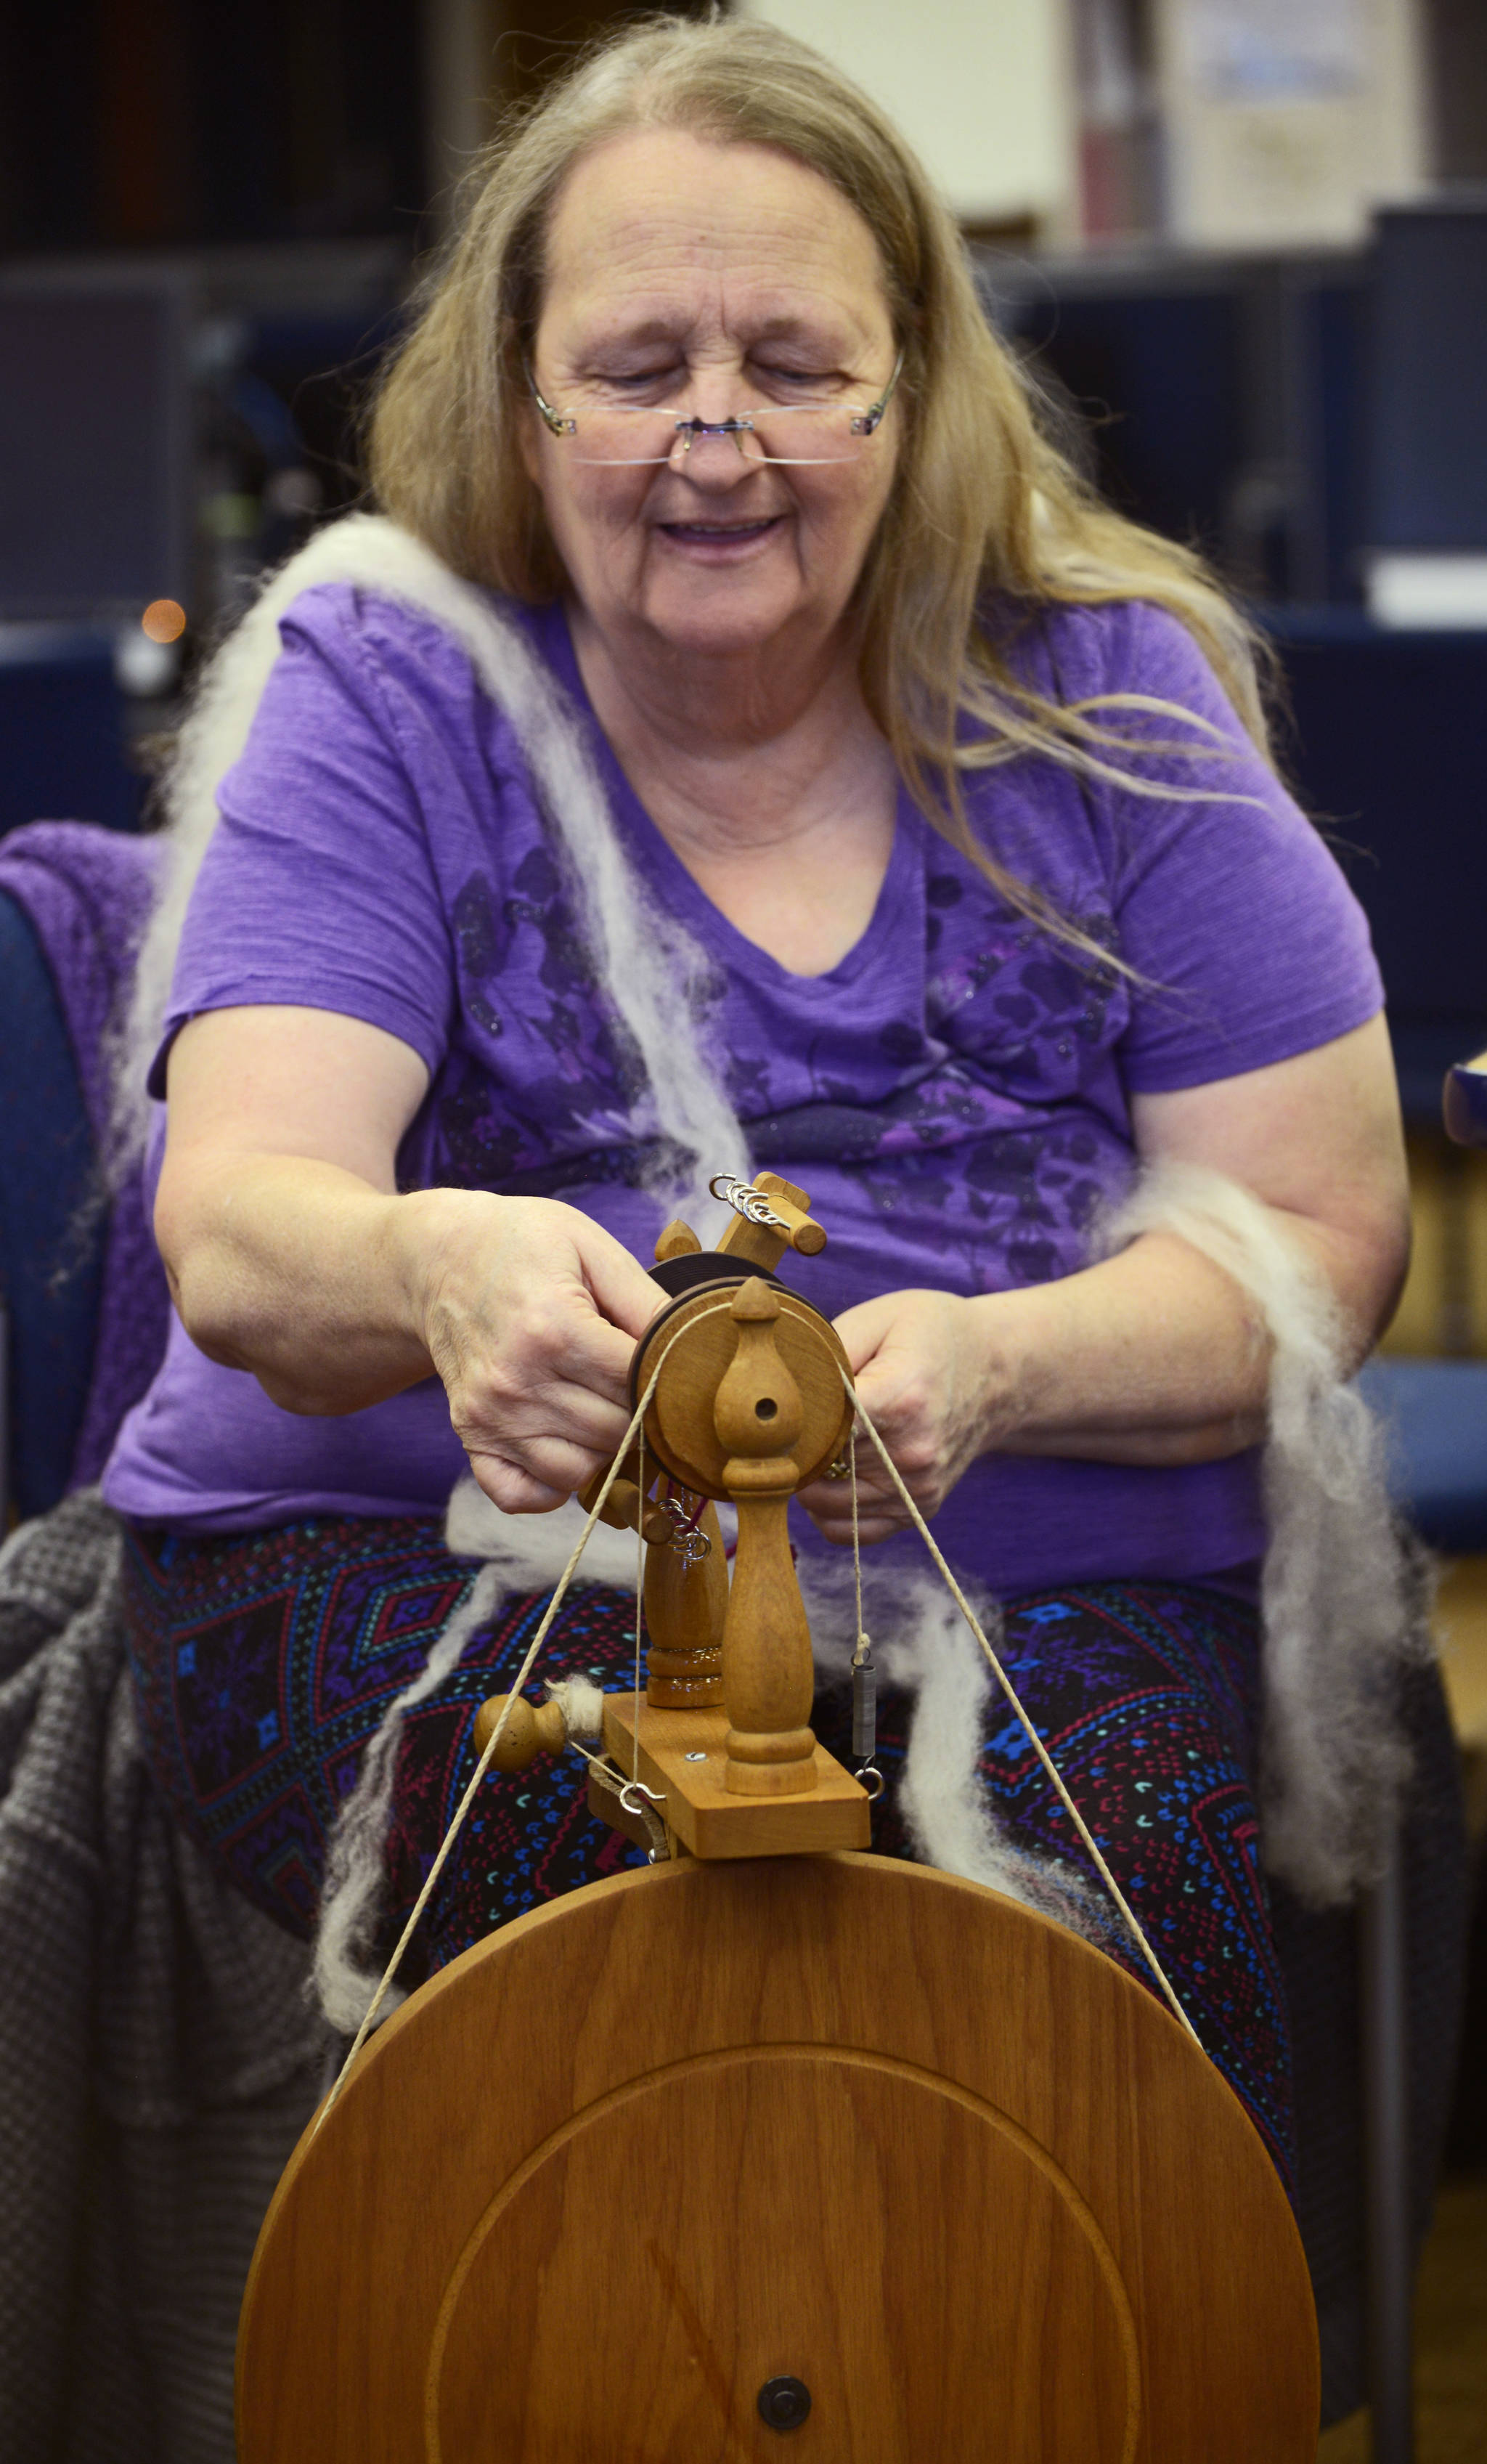 Debora Meester adjusts the bobbin of a spinning wheel while spinning wool into yarn during the first session of the Soldotna Community Schools yarn-spinning class on Tuesday, March 20 in the library of the Soldotna Preparatory School in Soldotna, Alaska. (Ben Boettger/Peninsula Clarion)